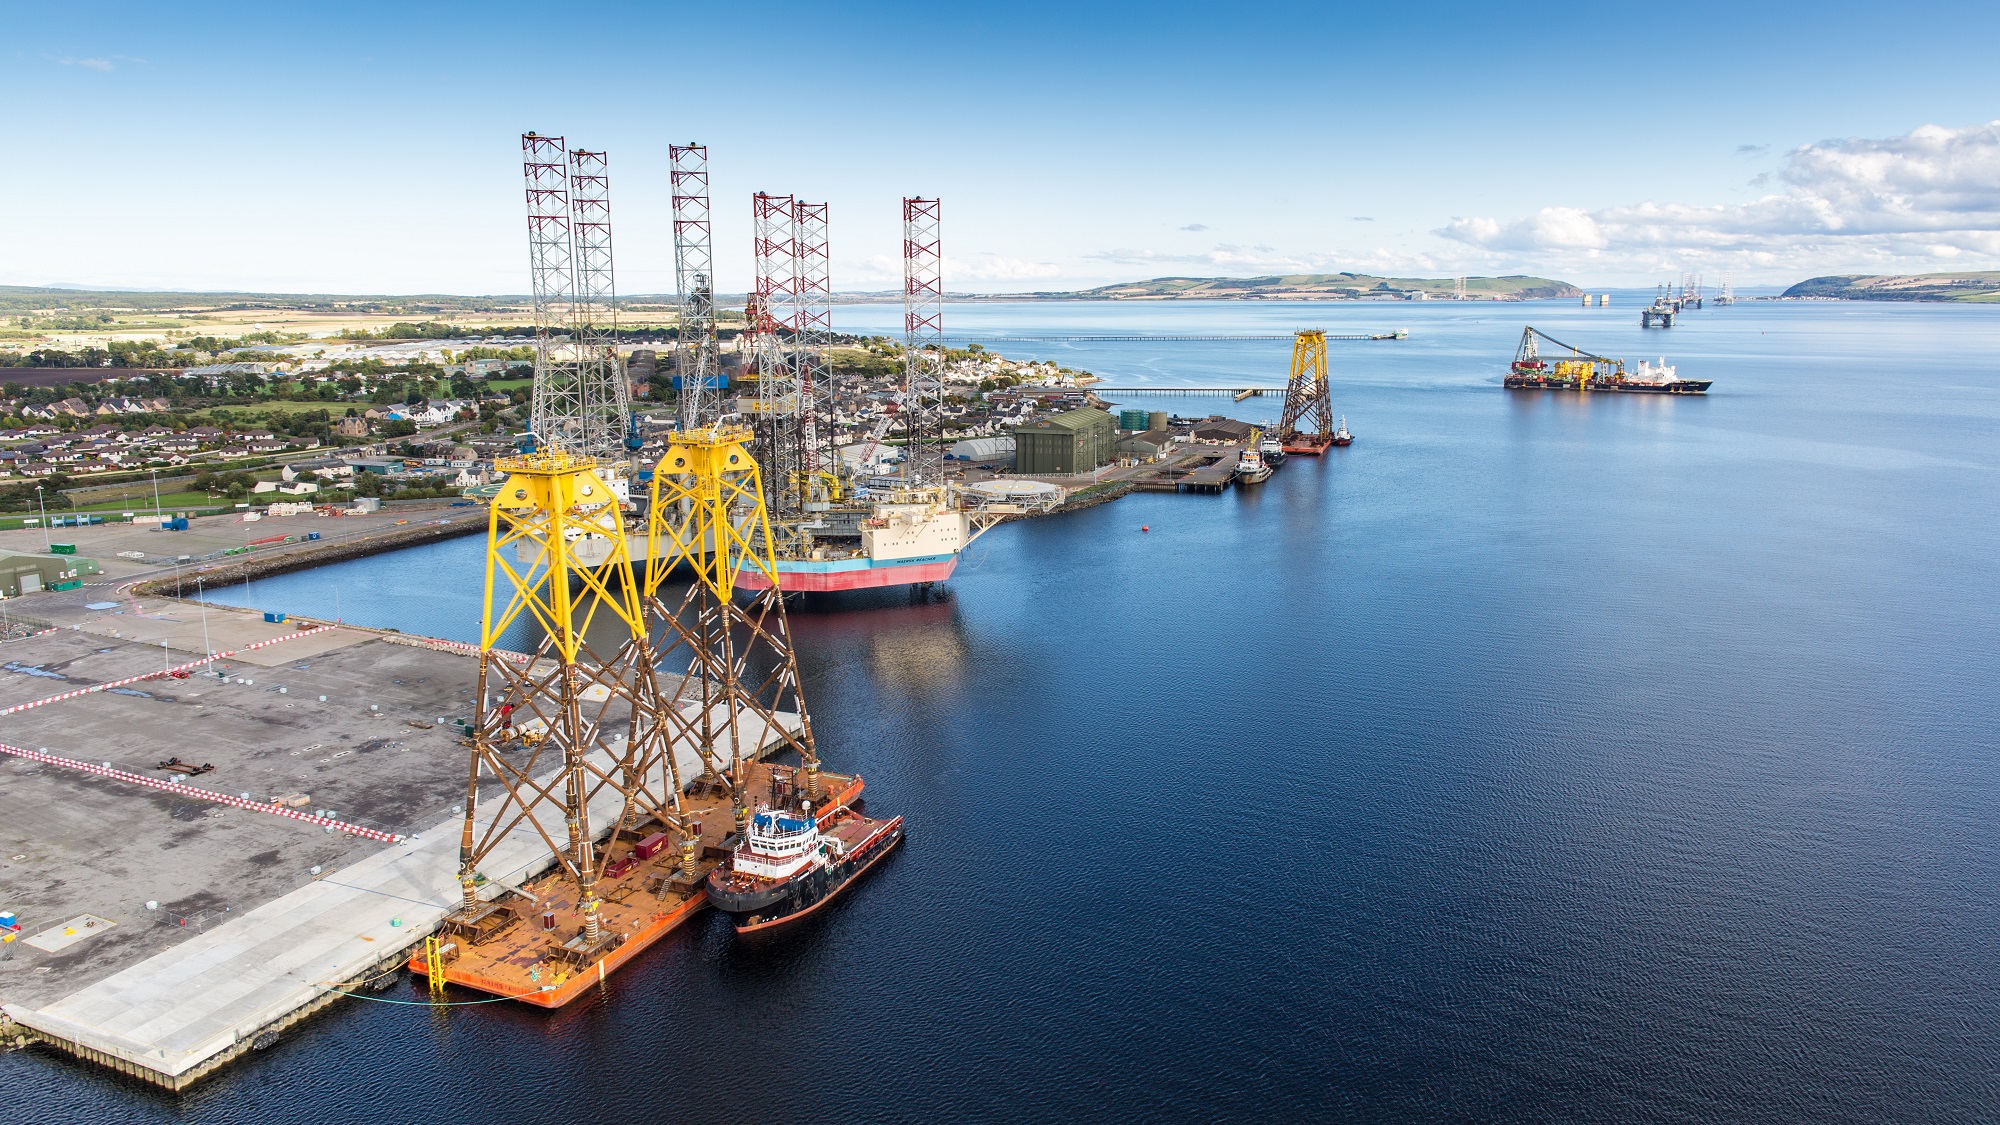 Port of Cromarty Firth, Gen2 join to import green hydrogen